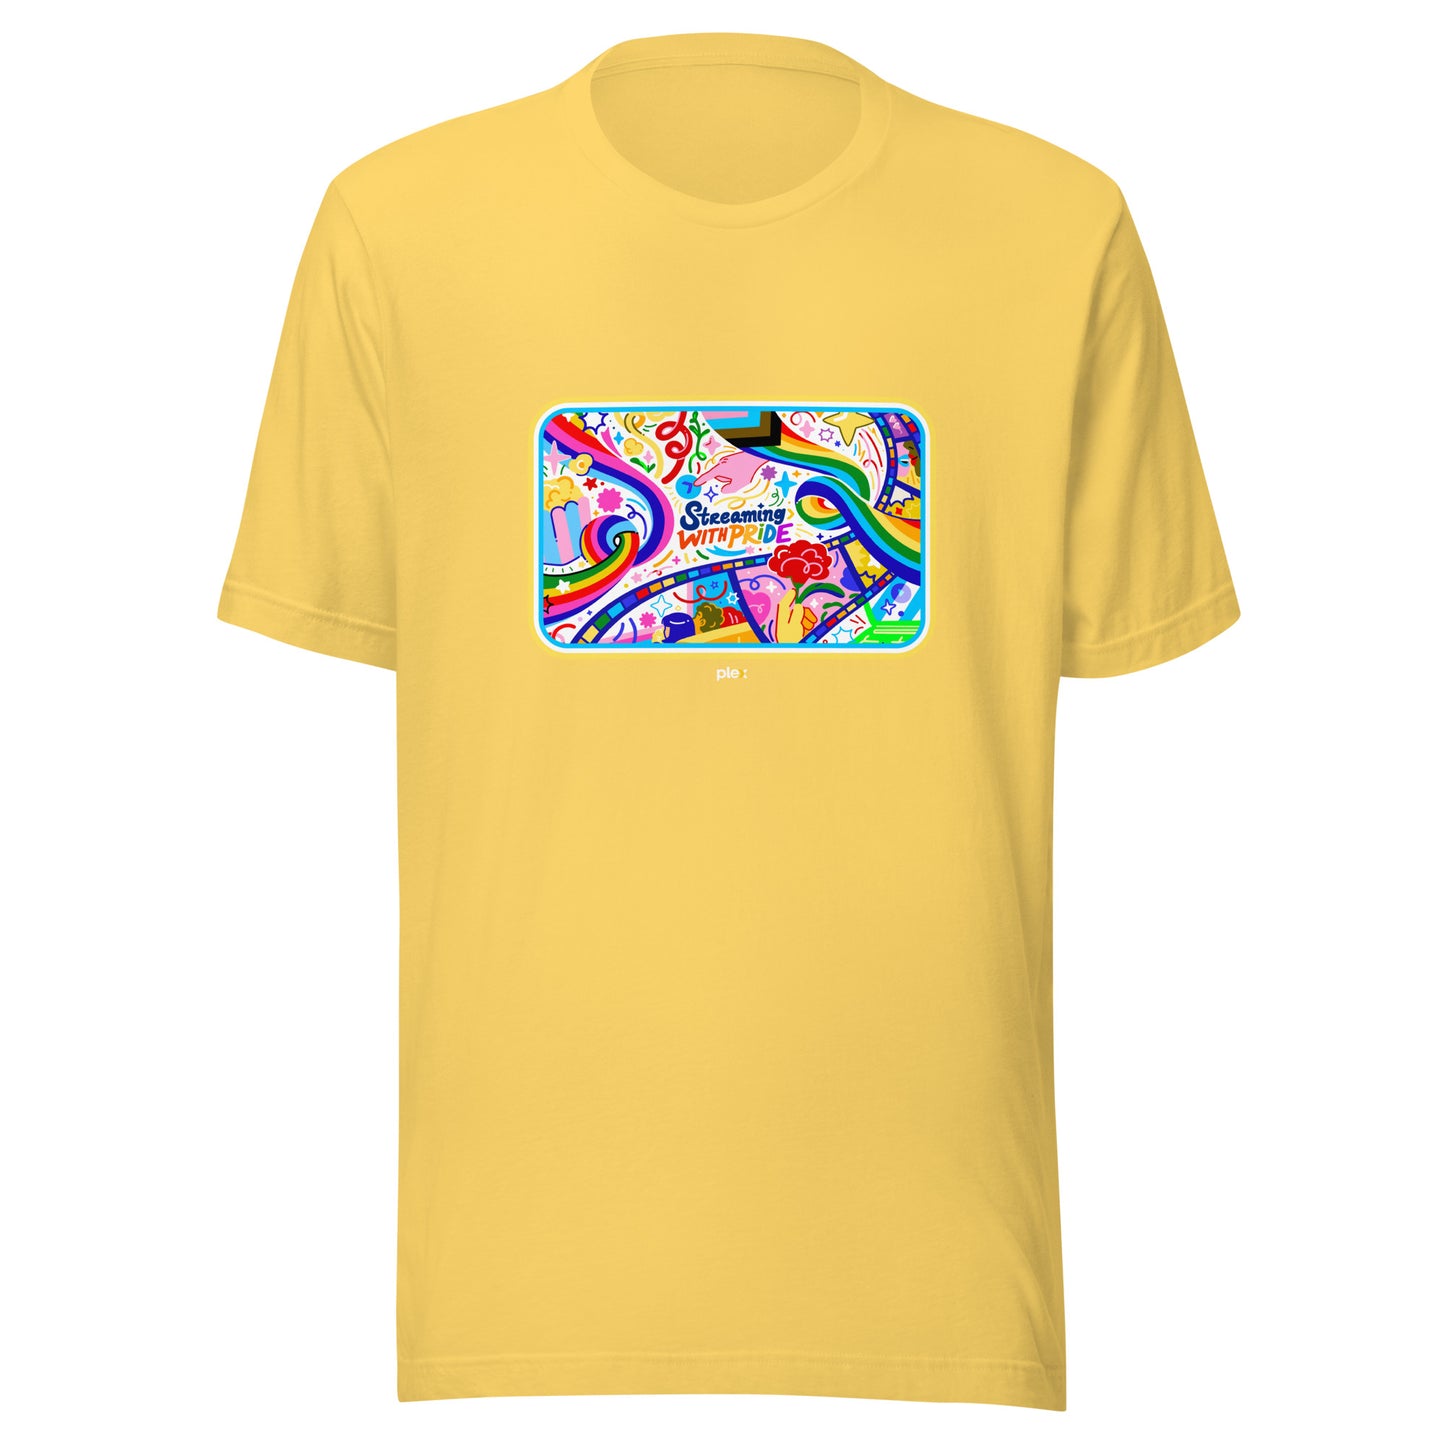 Streaming with Pride T-Shirt